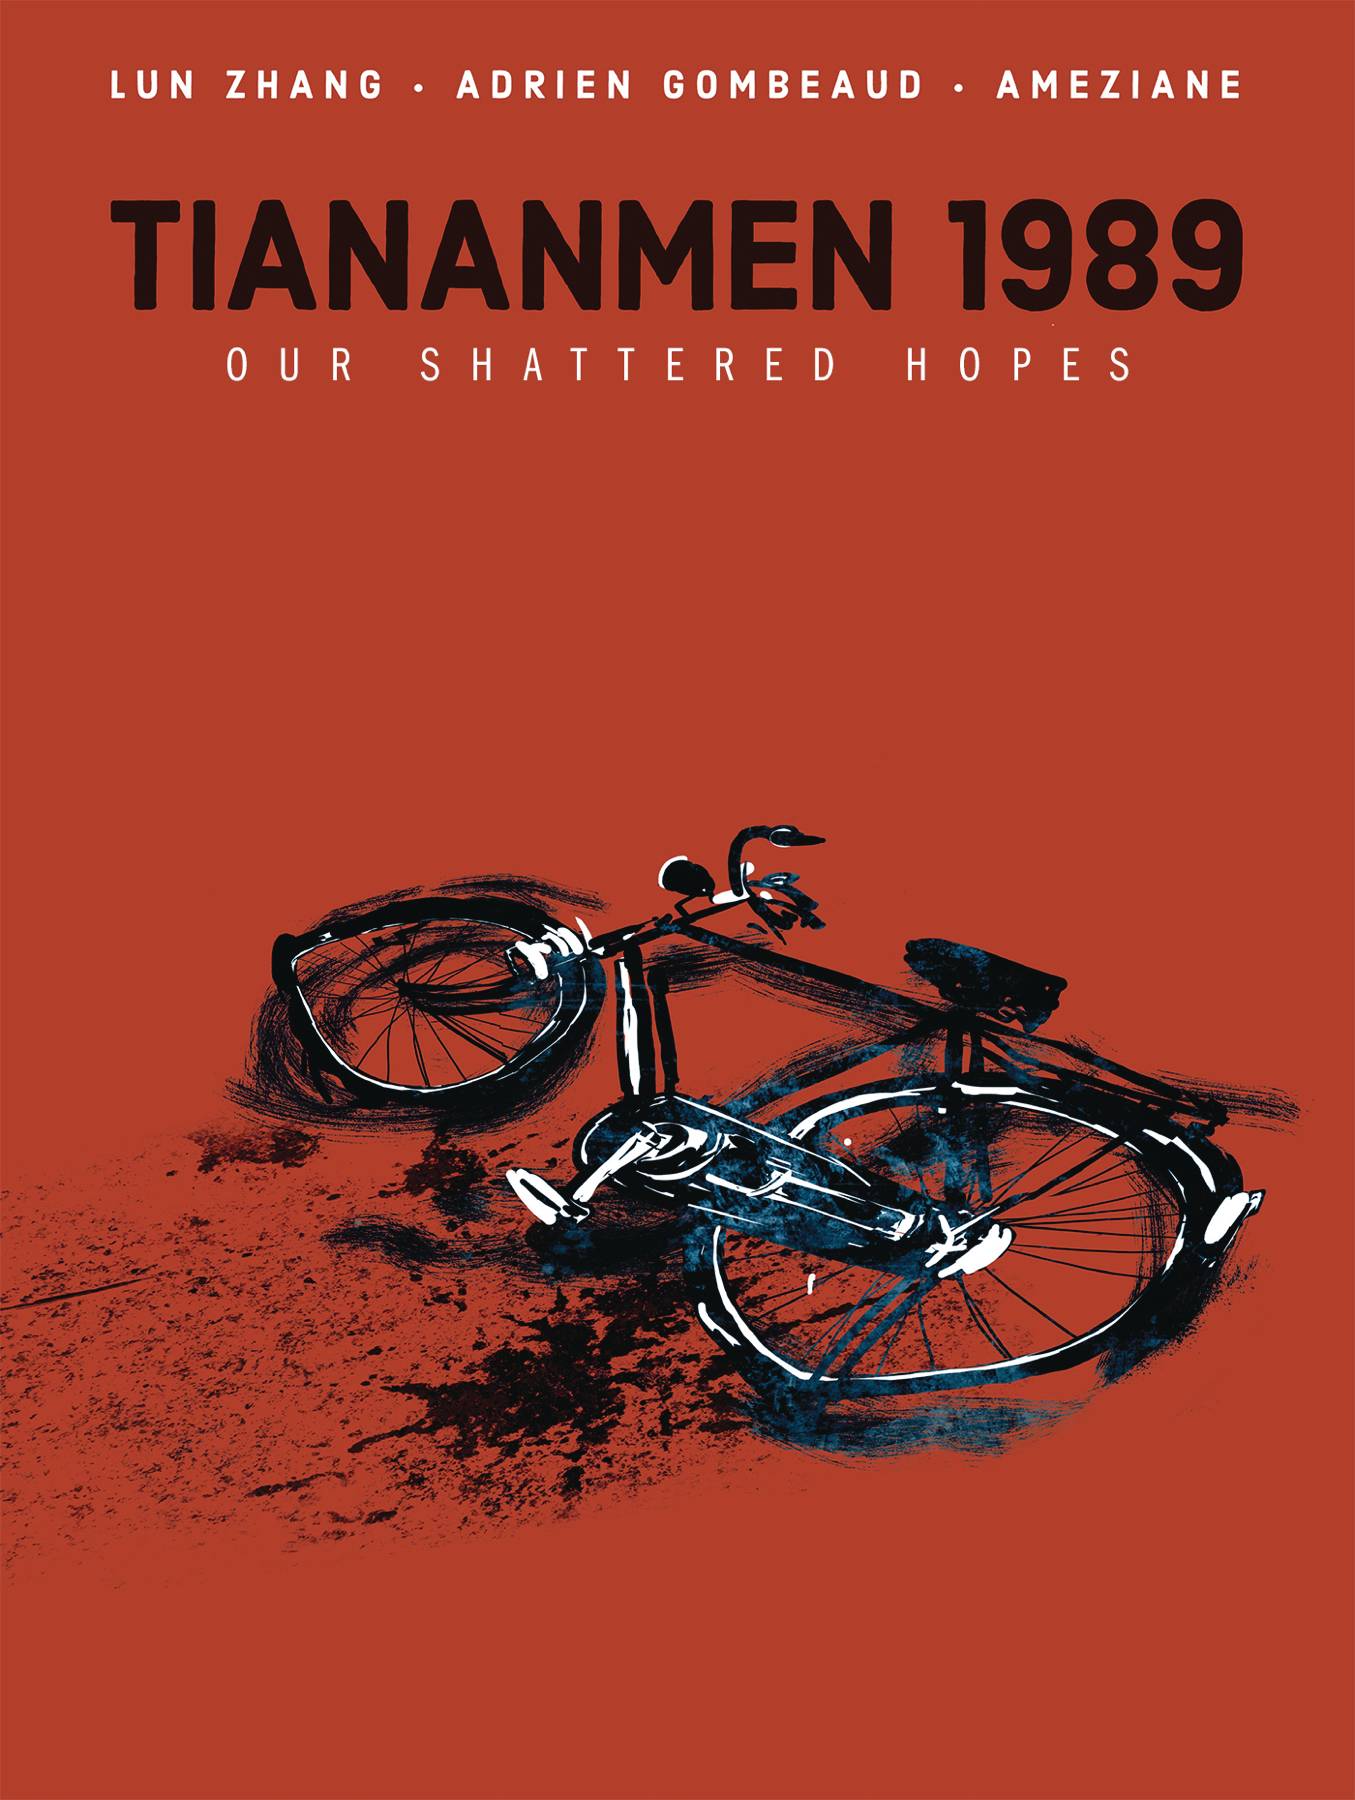 Tiananmen 1989 Our Shattered Hopes